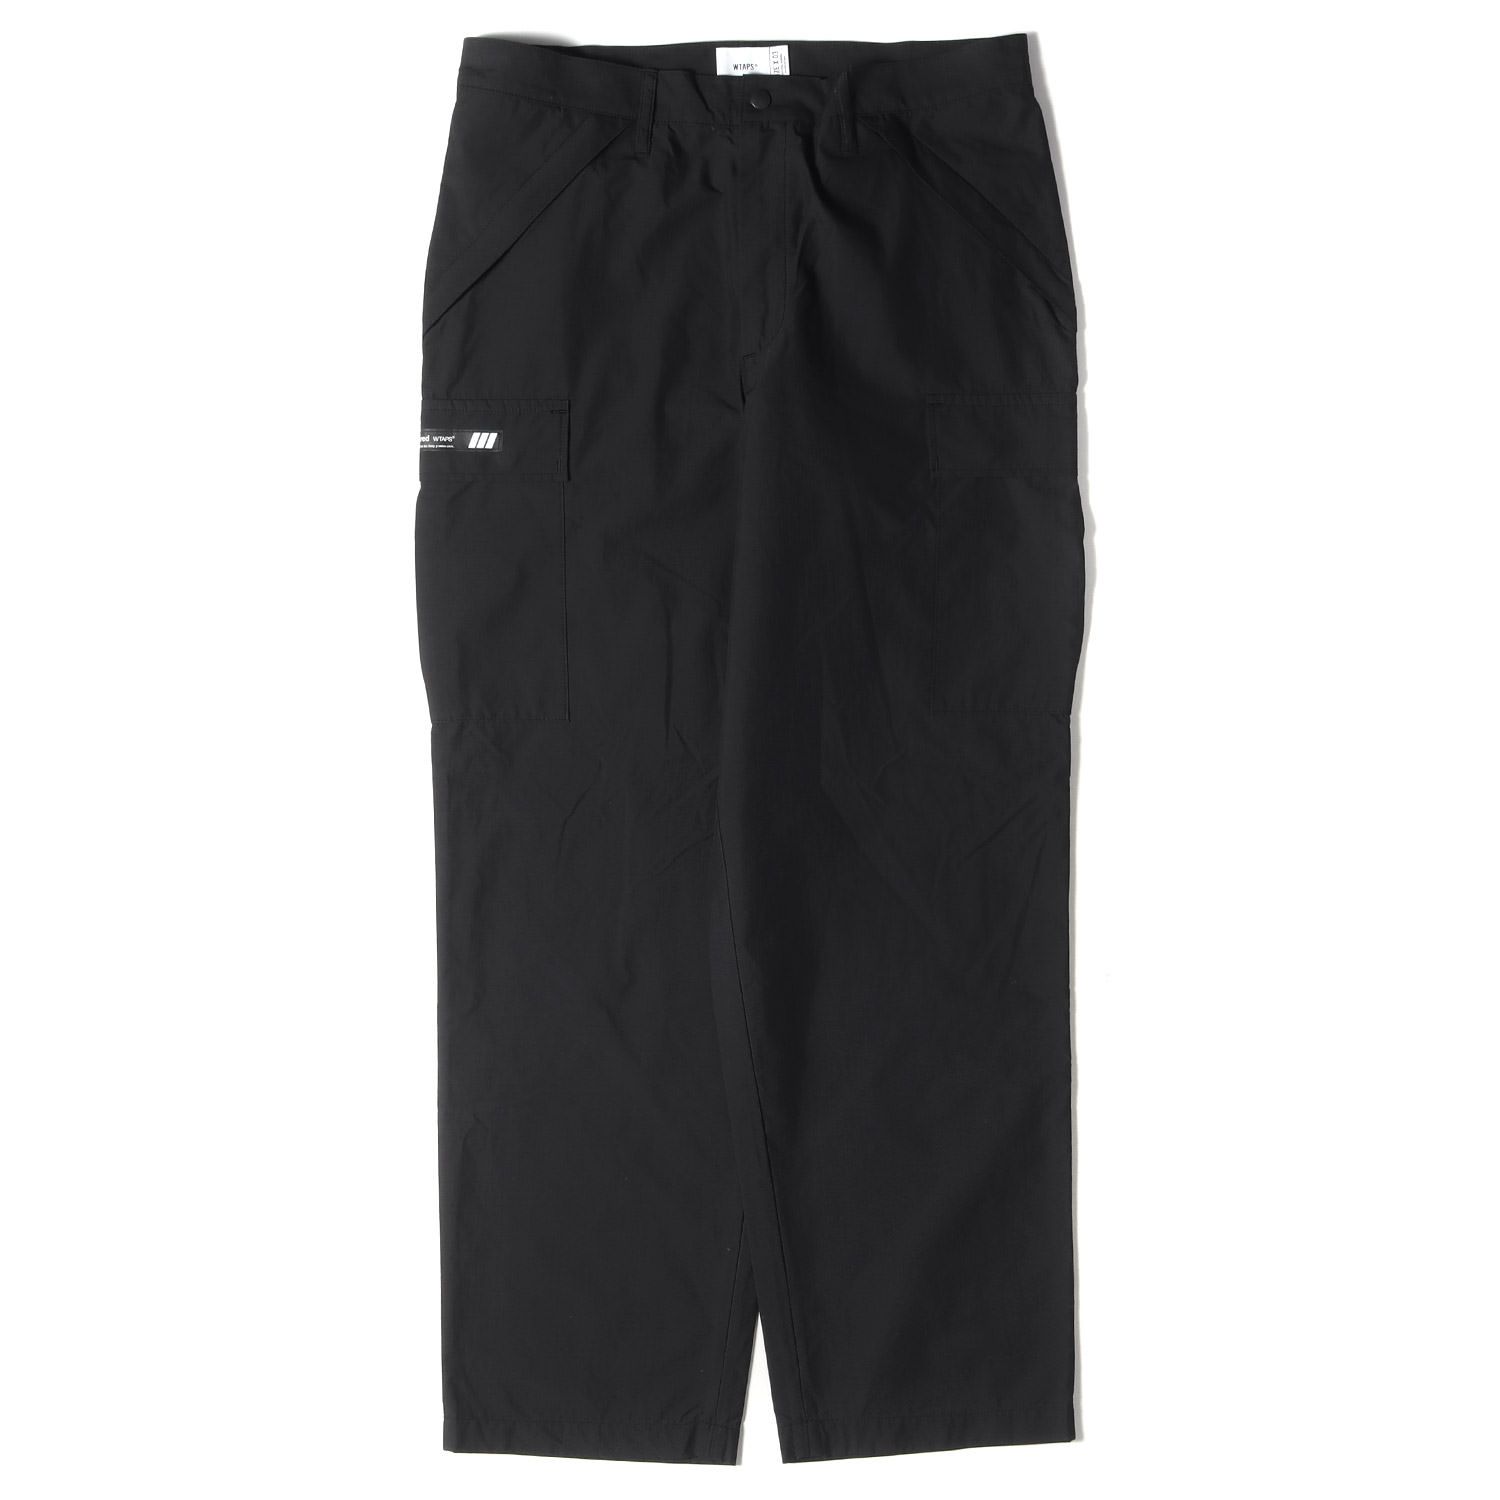 22AW WTAPS BGT TROUSERS NYCO. RIPSTOP